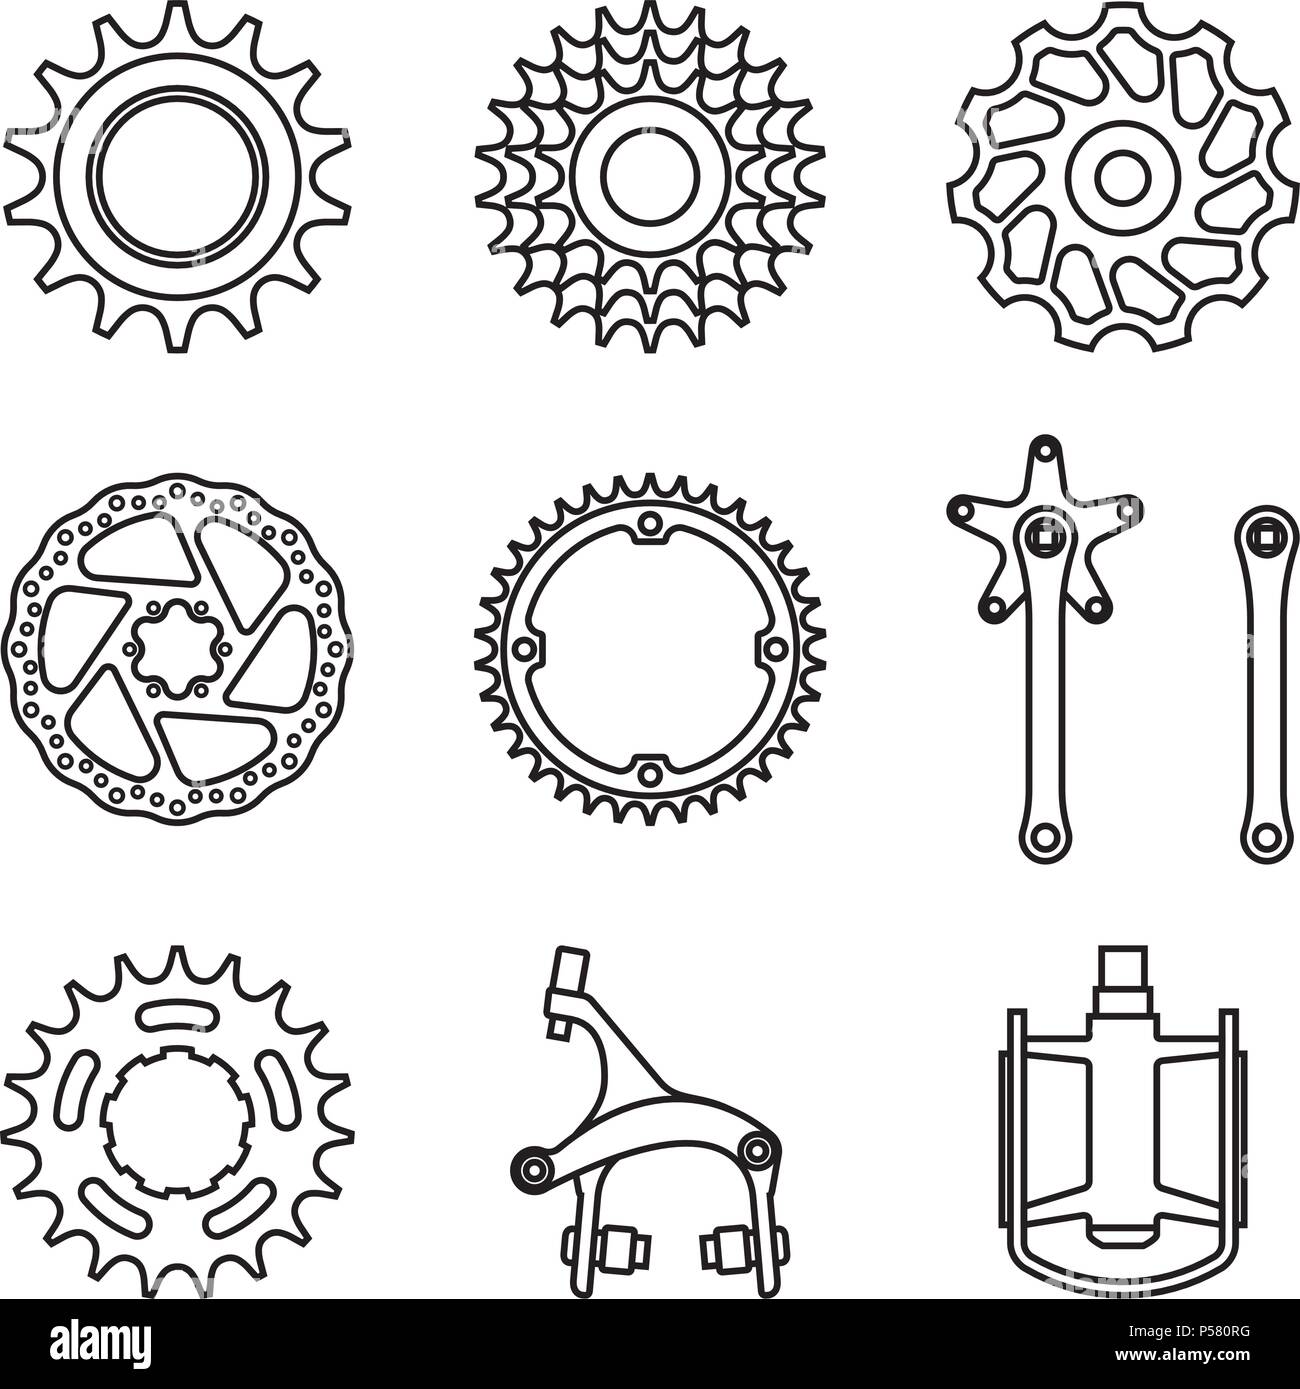 Set of bicycle parts for repair. Thin line vector Stock Vector